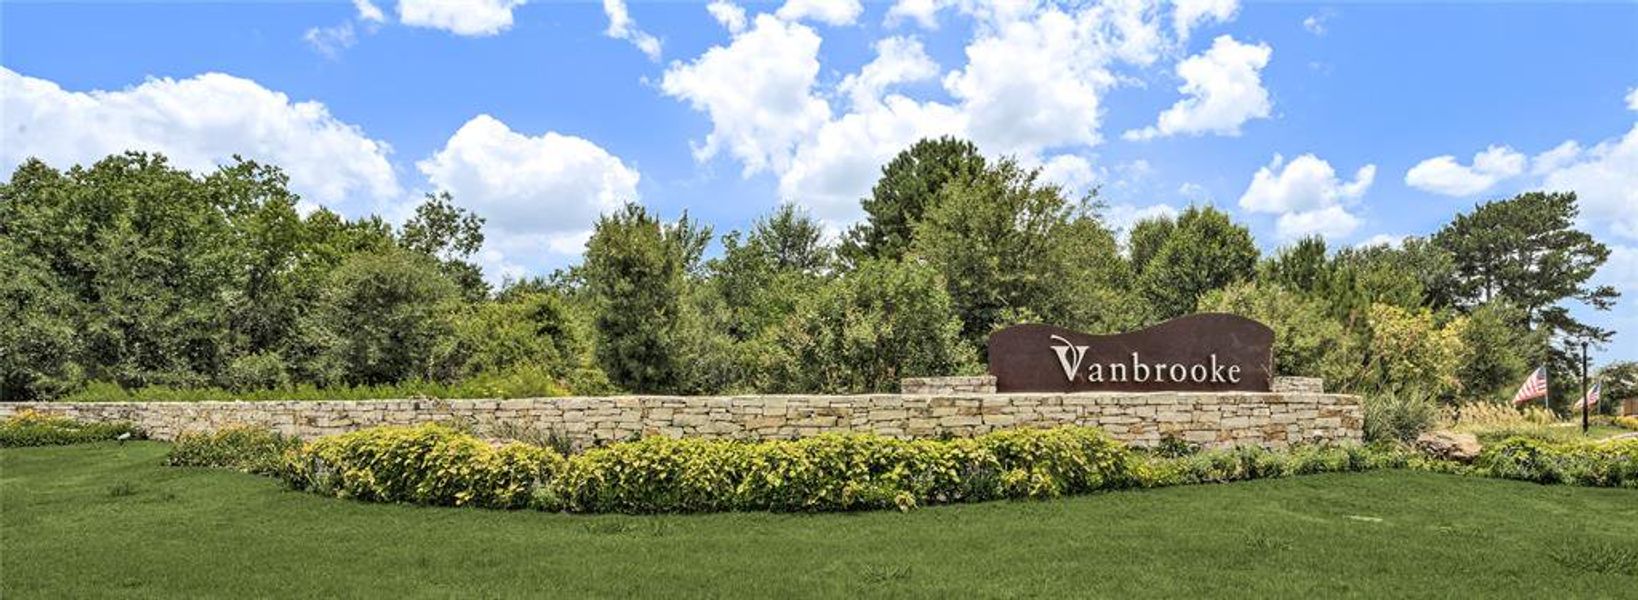 Vanbrooke is a one-of-a-kind community that you will not want to miss! The community offers residents an unparalleled standard of living with the picturesque surroundings, hidden away along Highway 359 just north of Fulshear. Come home to sweeping, tranquil backdrops and surroundings while being just a short drive away from your favorite amenities of West Houston, Sugar Land, and Katy.